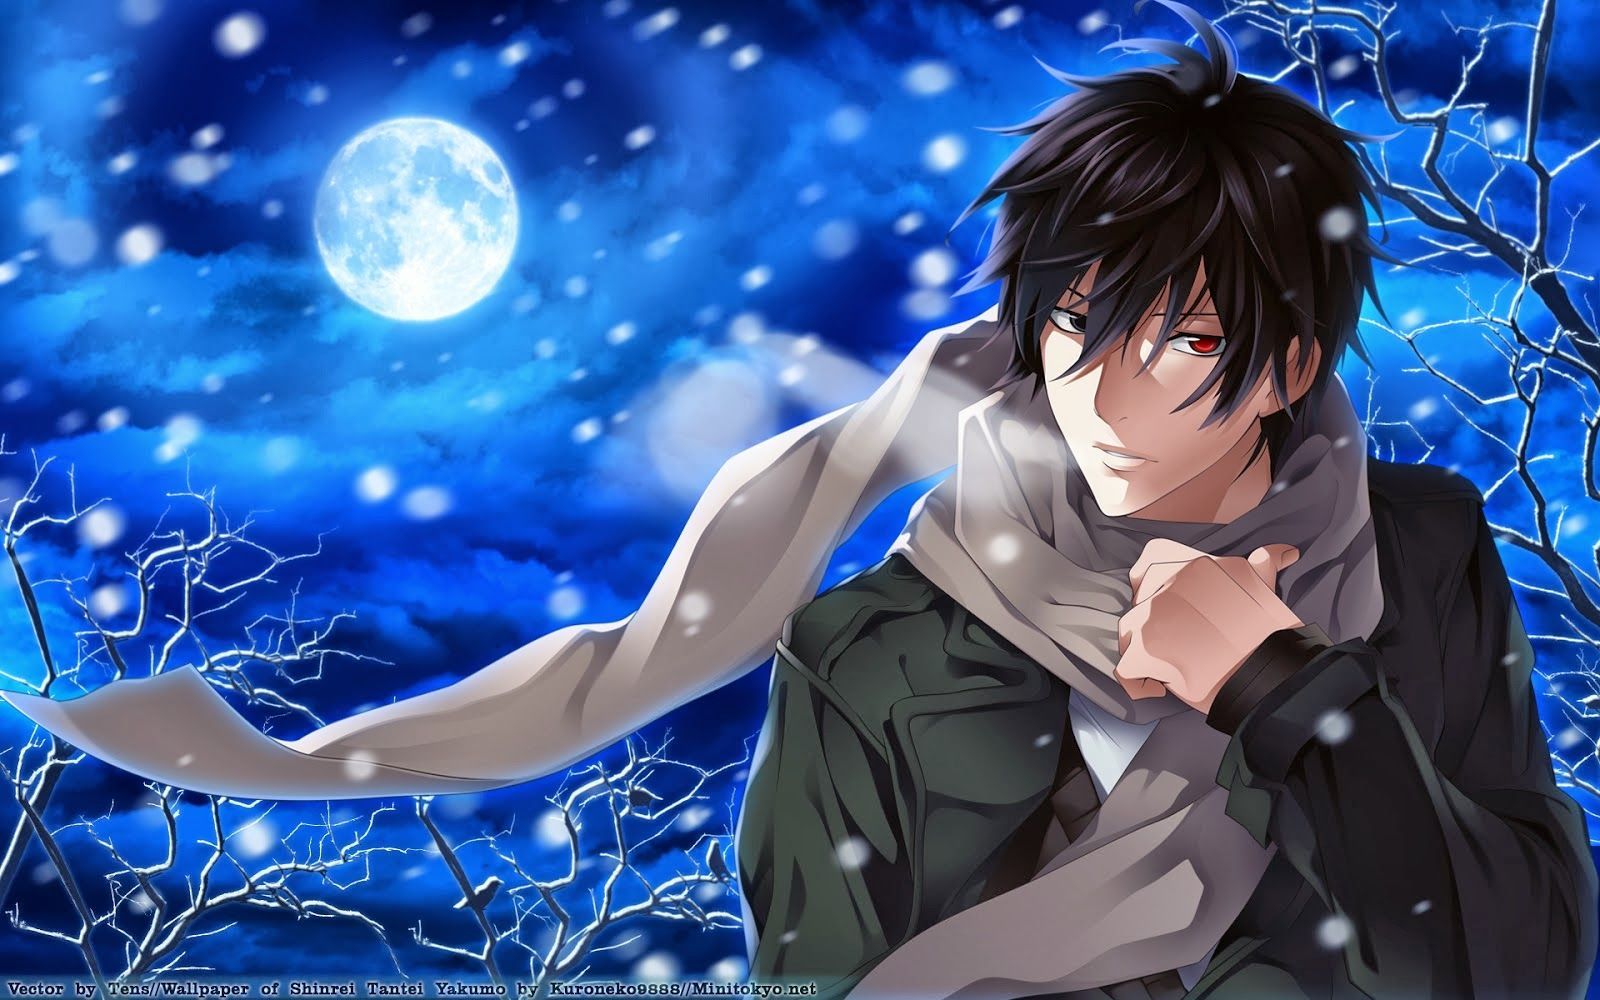 Winter Anime 3D Wallpaper Weve gathered more than 3 million image uploaded by our users and sorted them by the most popular o. Anime boy, Cute anime boy, Yakumo